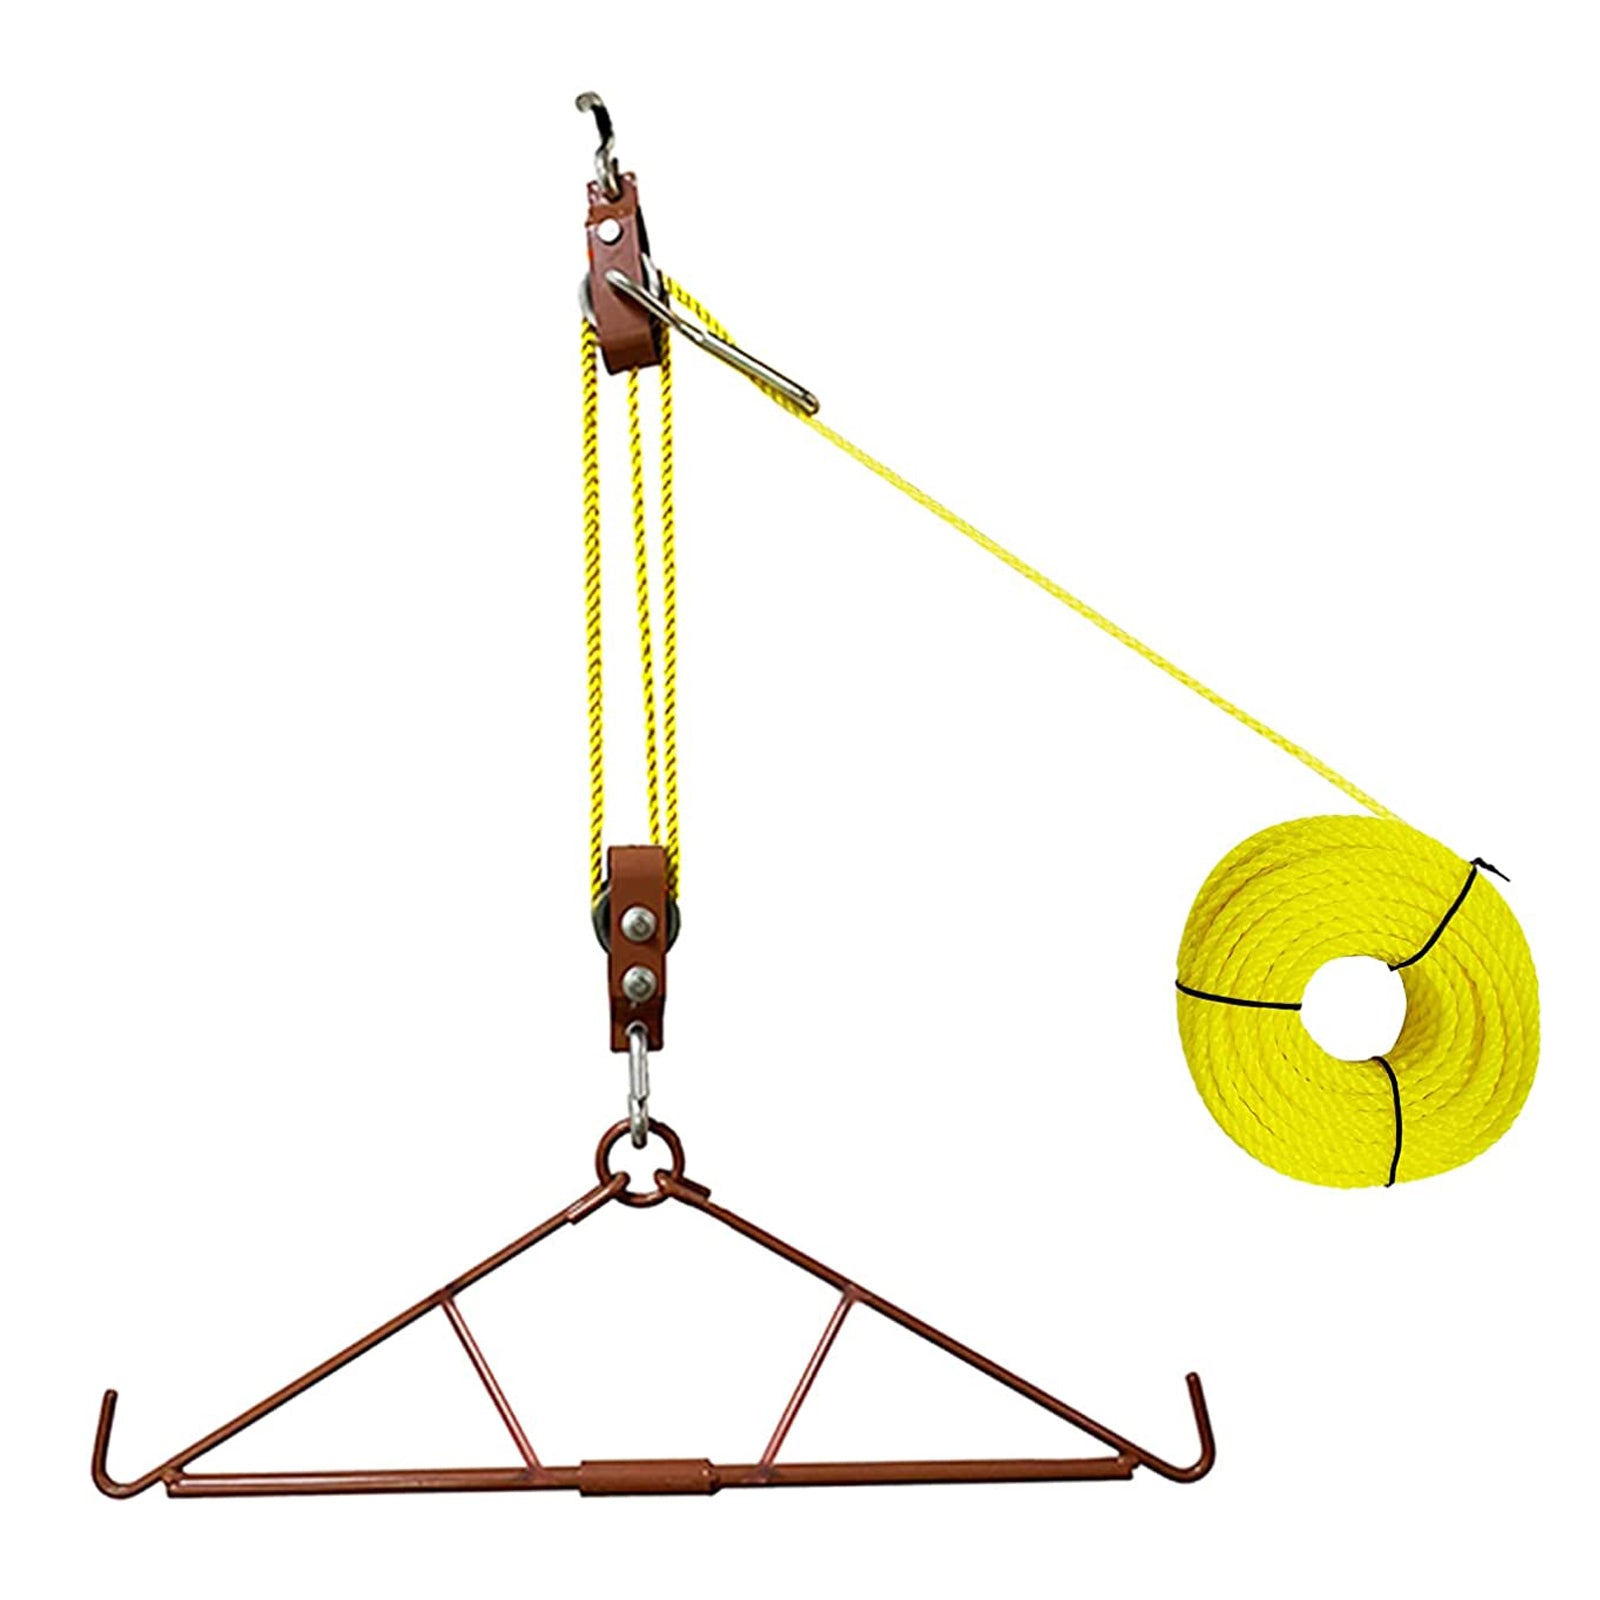 Atflbox Game Hoist Gambrel System and Dual Pulley Hoist Lift System, High  Capacity Hunting Access